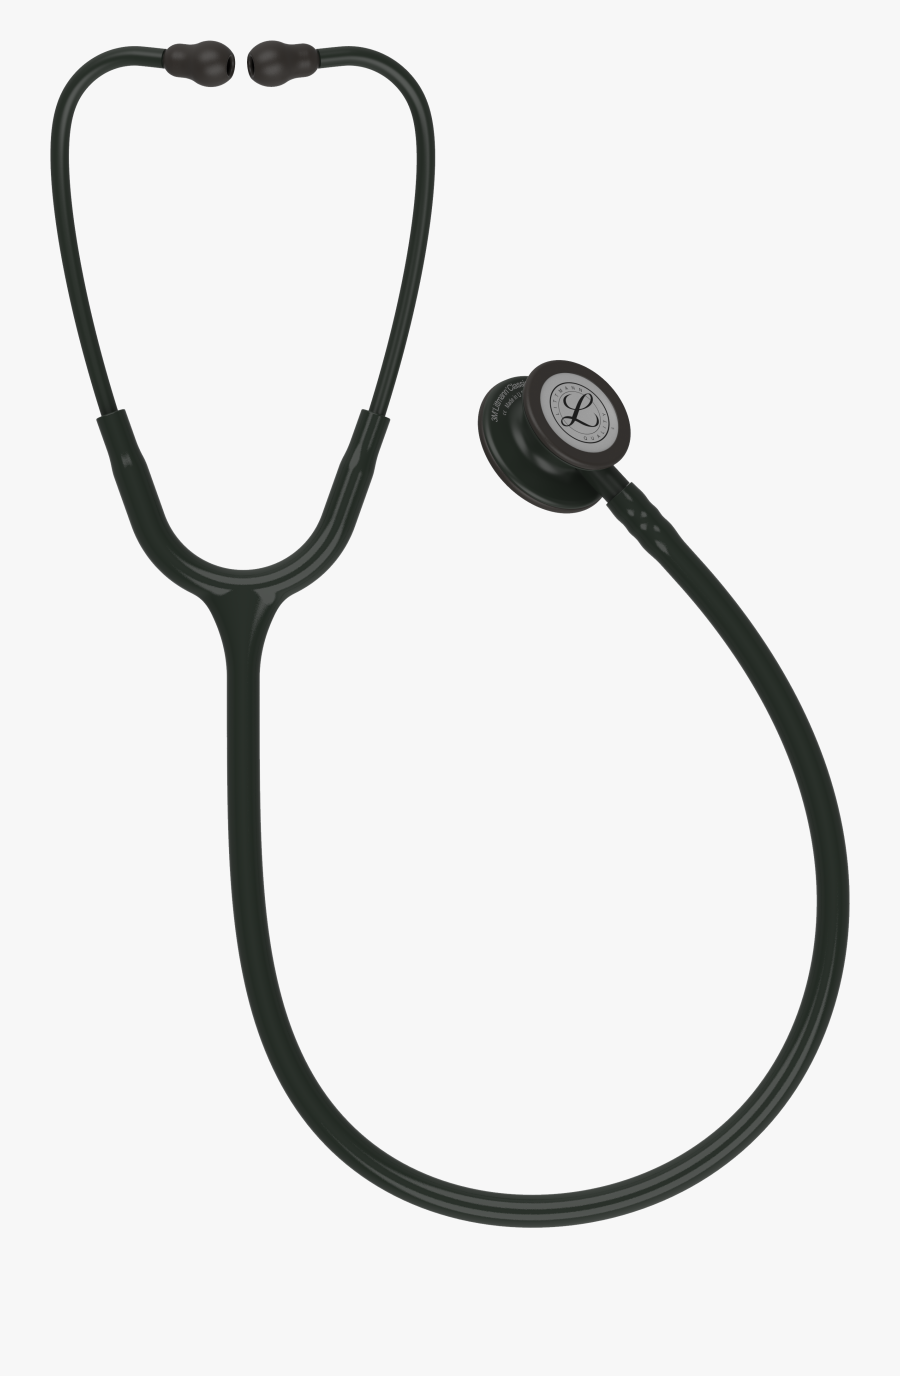 Stethoscope Png - Black Stethoscope, Transparent Clipart